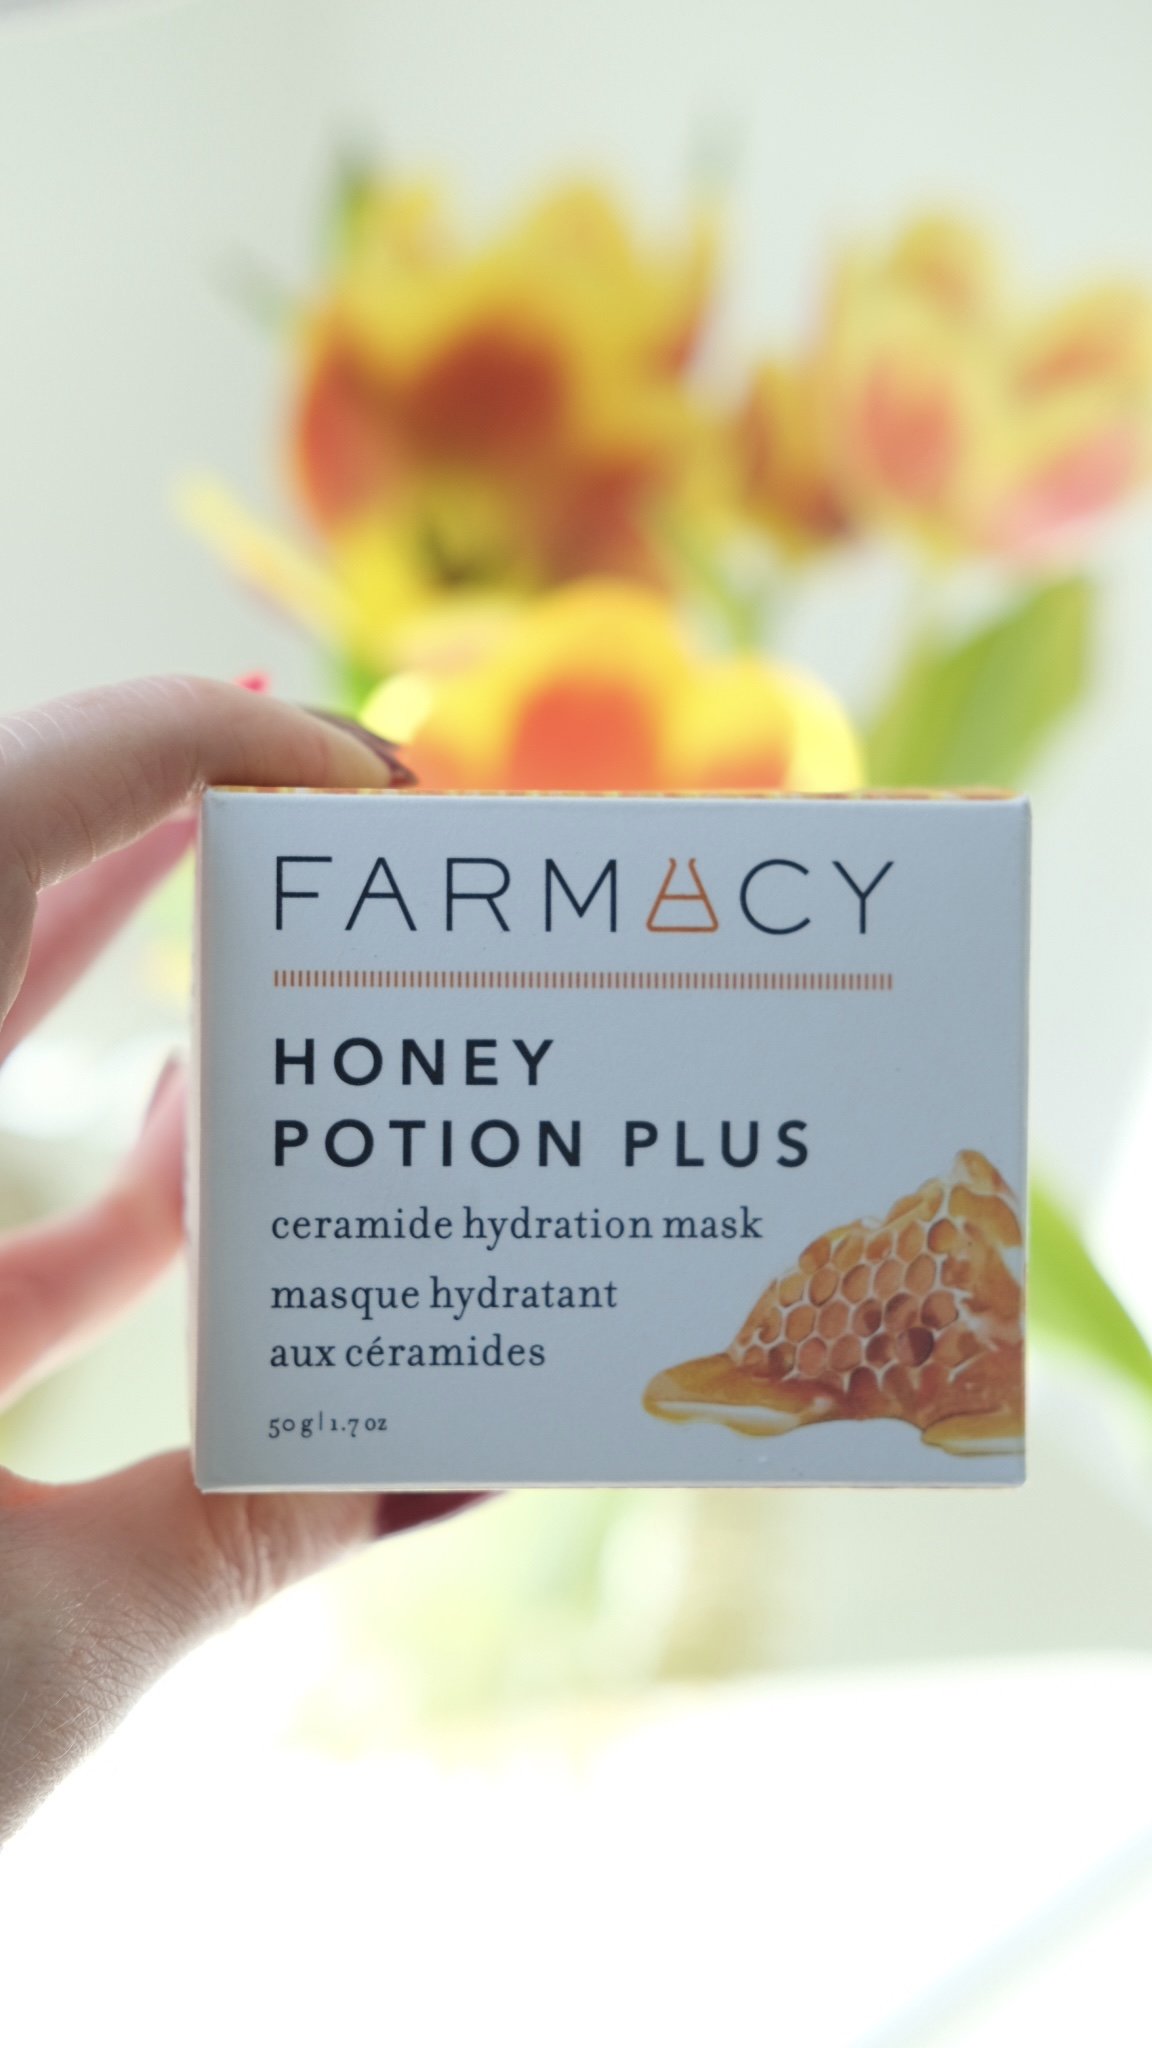 Farmcy honey potion review and Farmacy influencer discount code